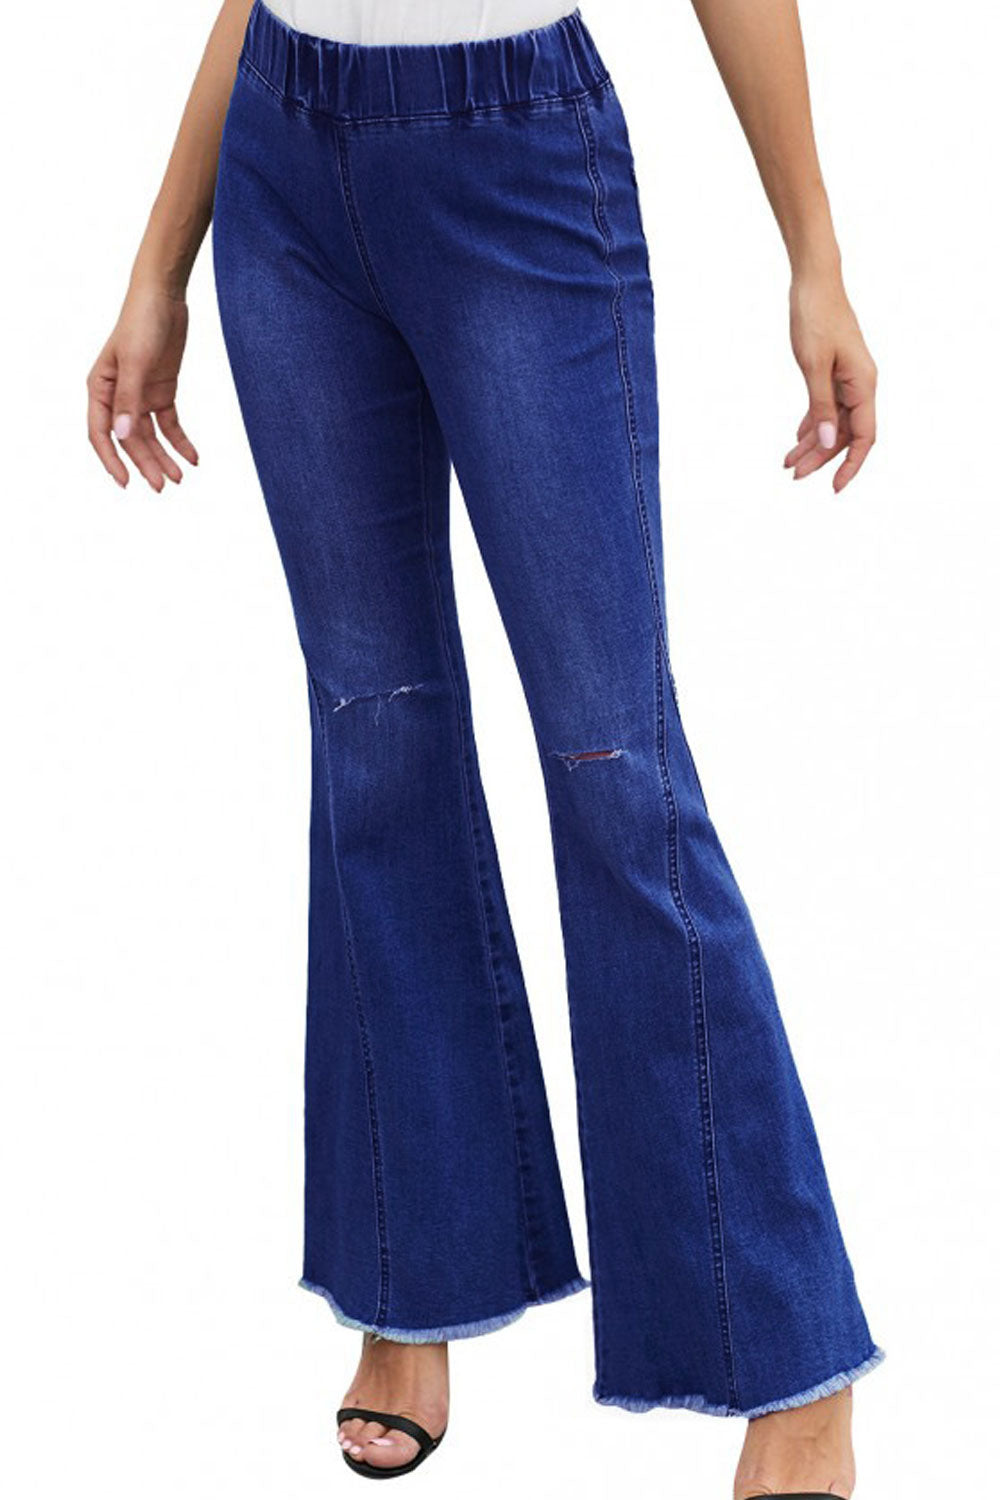 Women Loose End Fit Casual Jeans - WJN73912